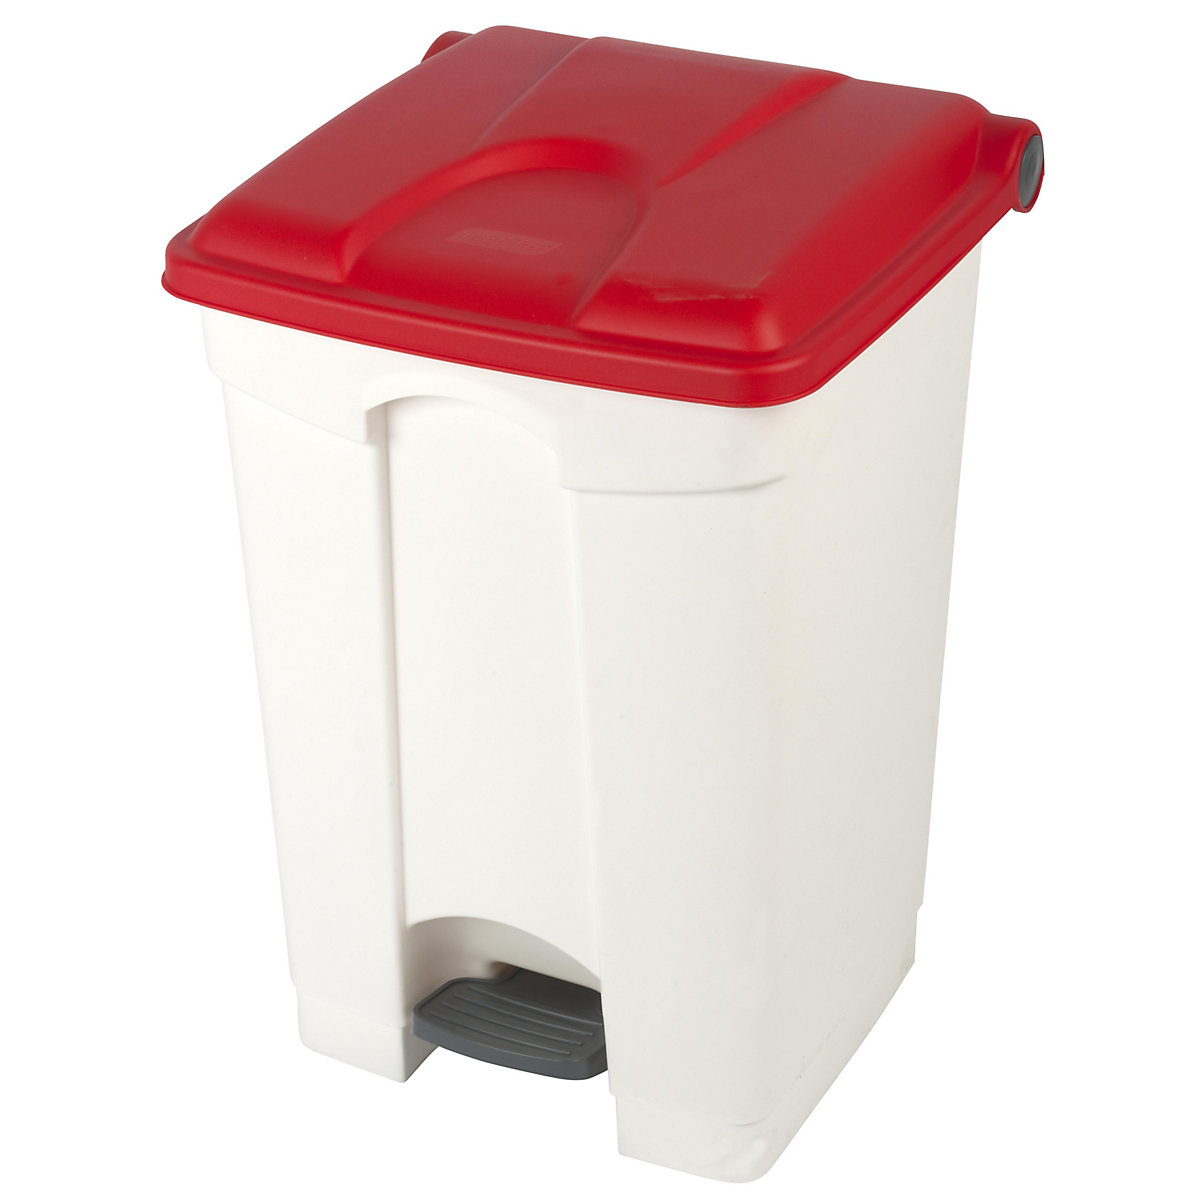 EUROKRAFTbasic – Pedal waste collector, capacity 45 l, WxHxD 410 x 600 x 400 mm, white, red lid